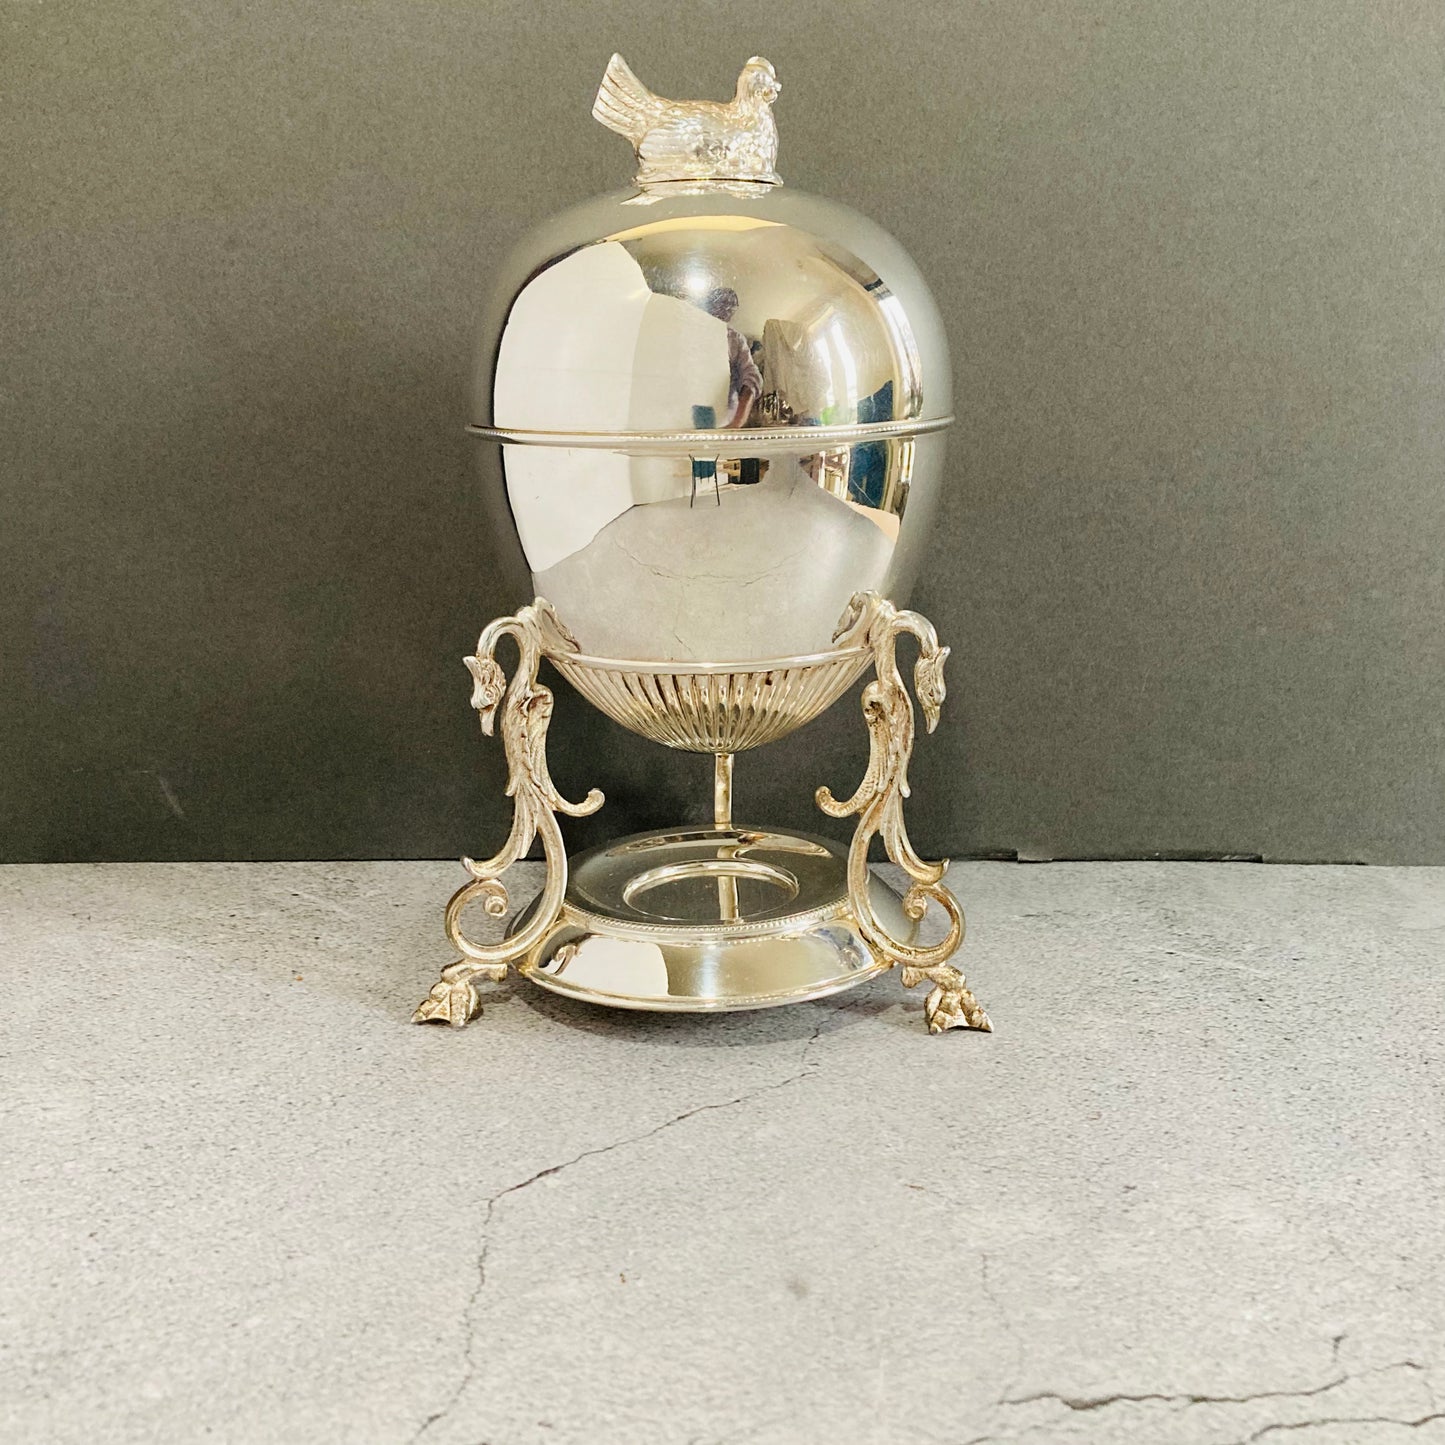 The Groom Heidi - Victorian Silver Egg Coddler with Hen Finial